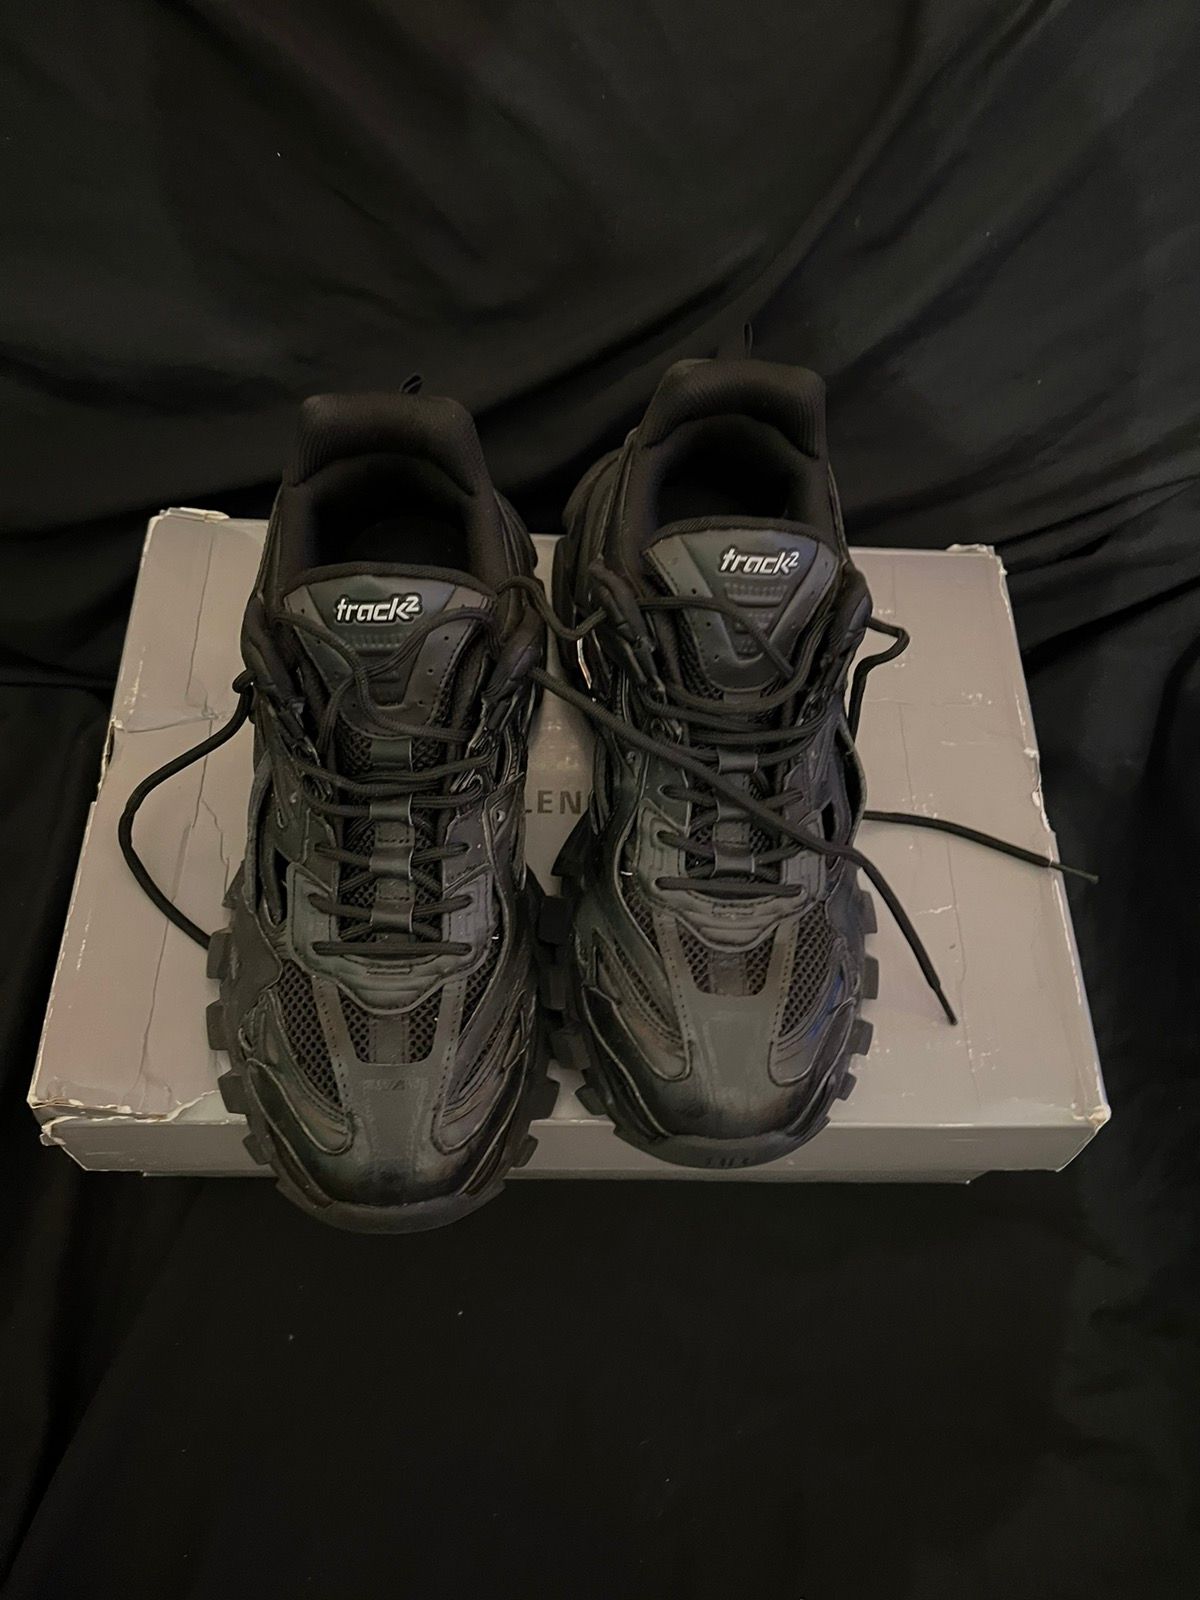 Pre-owned Balenciaga Track 2 Sneakers Washed Black Size 44 $975